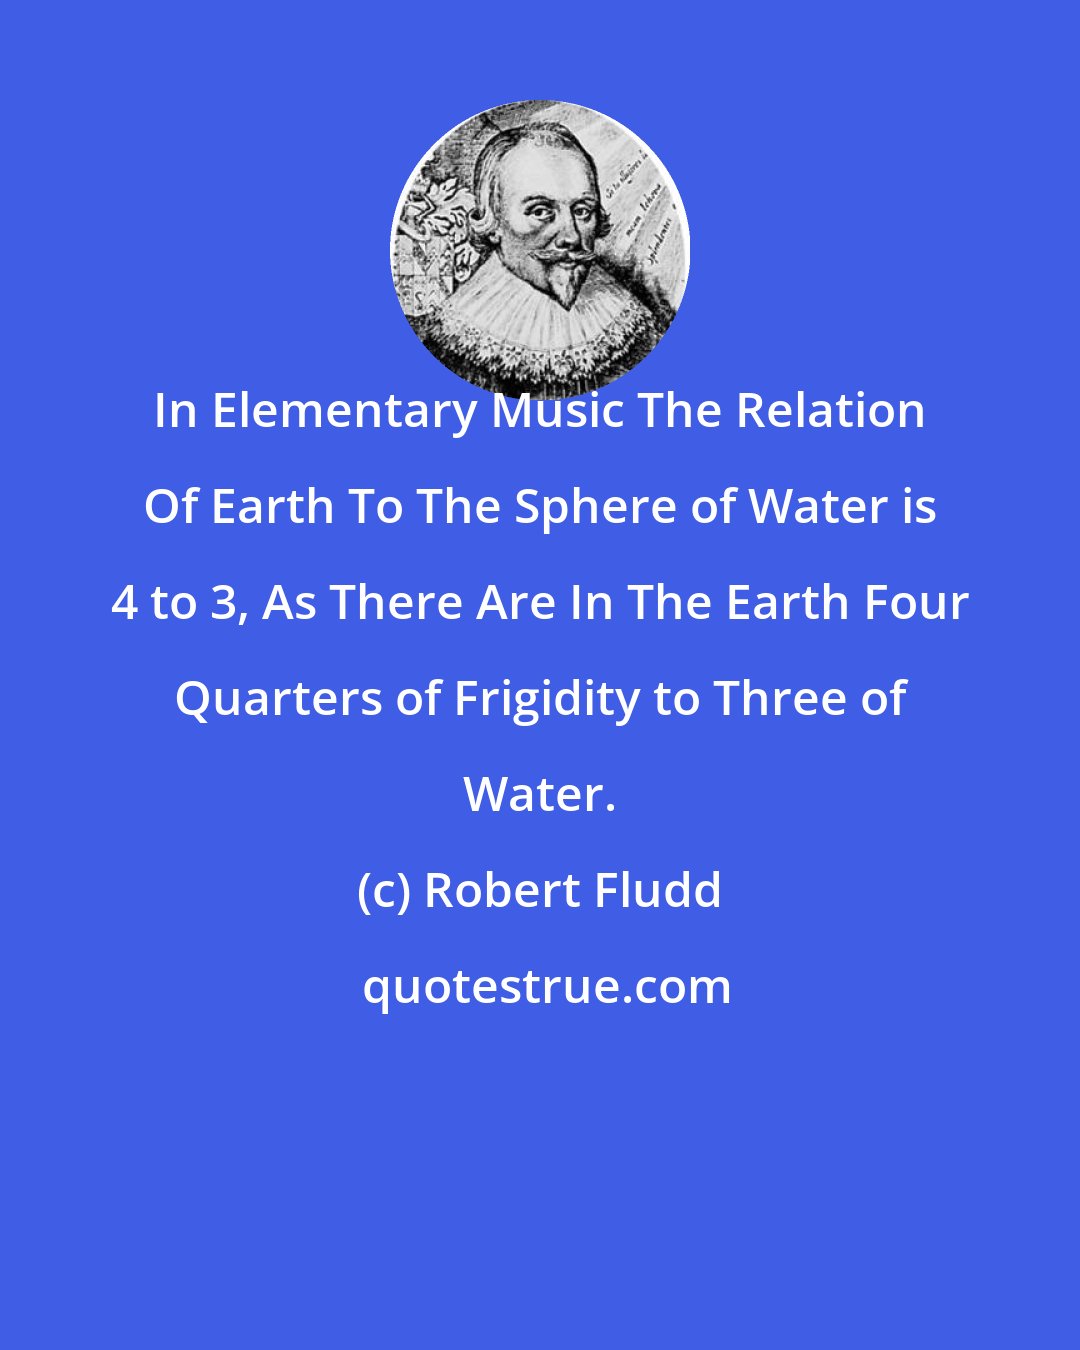 Robert Fludd: In Elementary Music The Relation Of Earth To The Sphere of Water is 4 to 3, As There Are In The Earth Four Quarters of Frigidity to Three of Water.